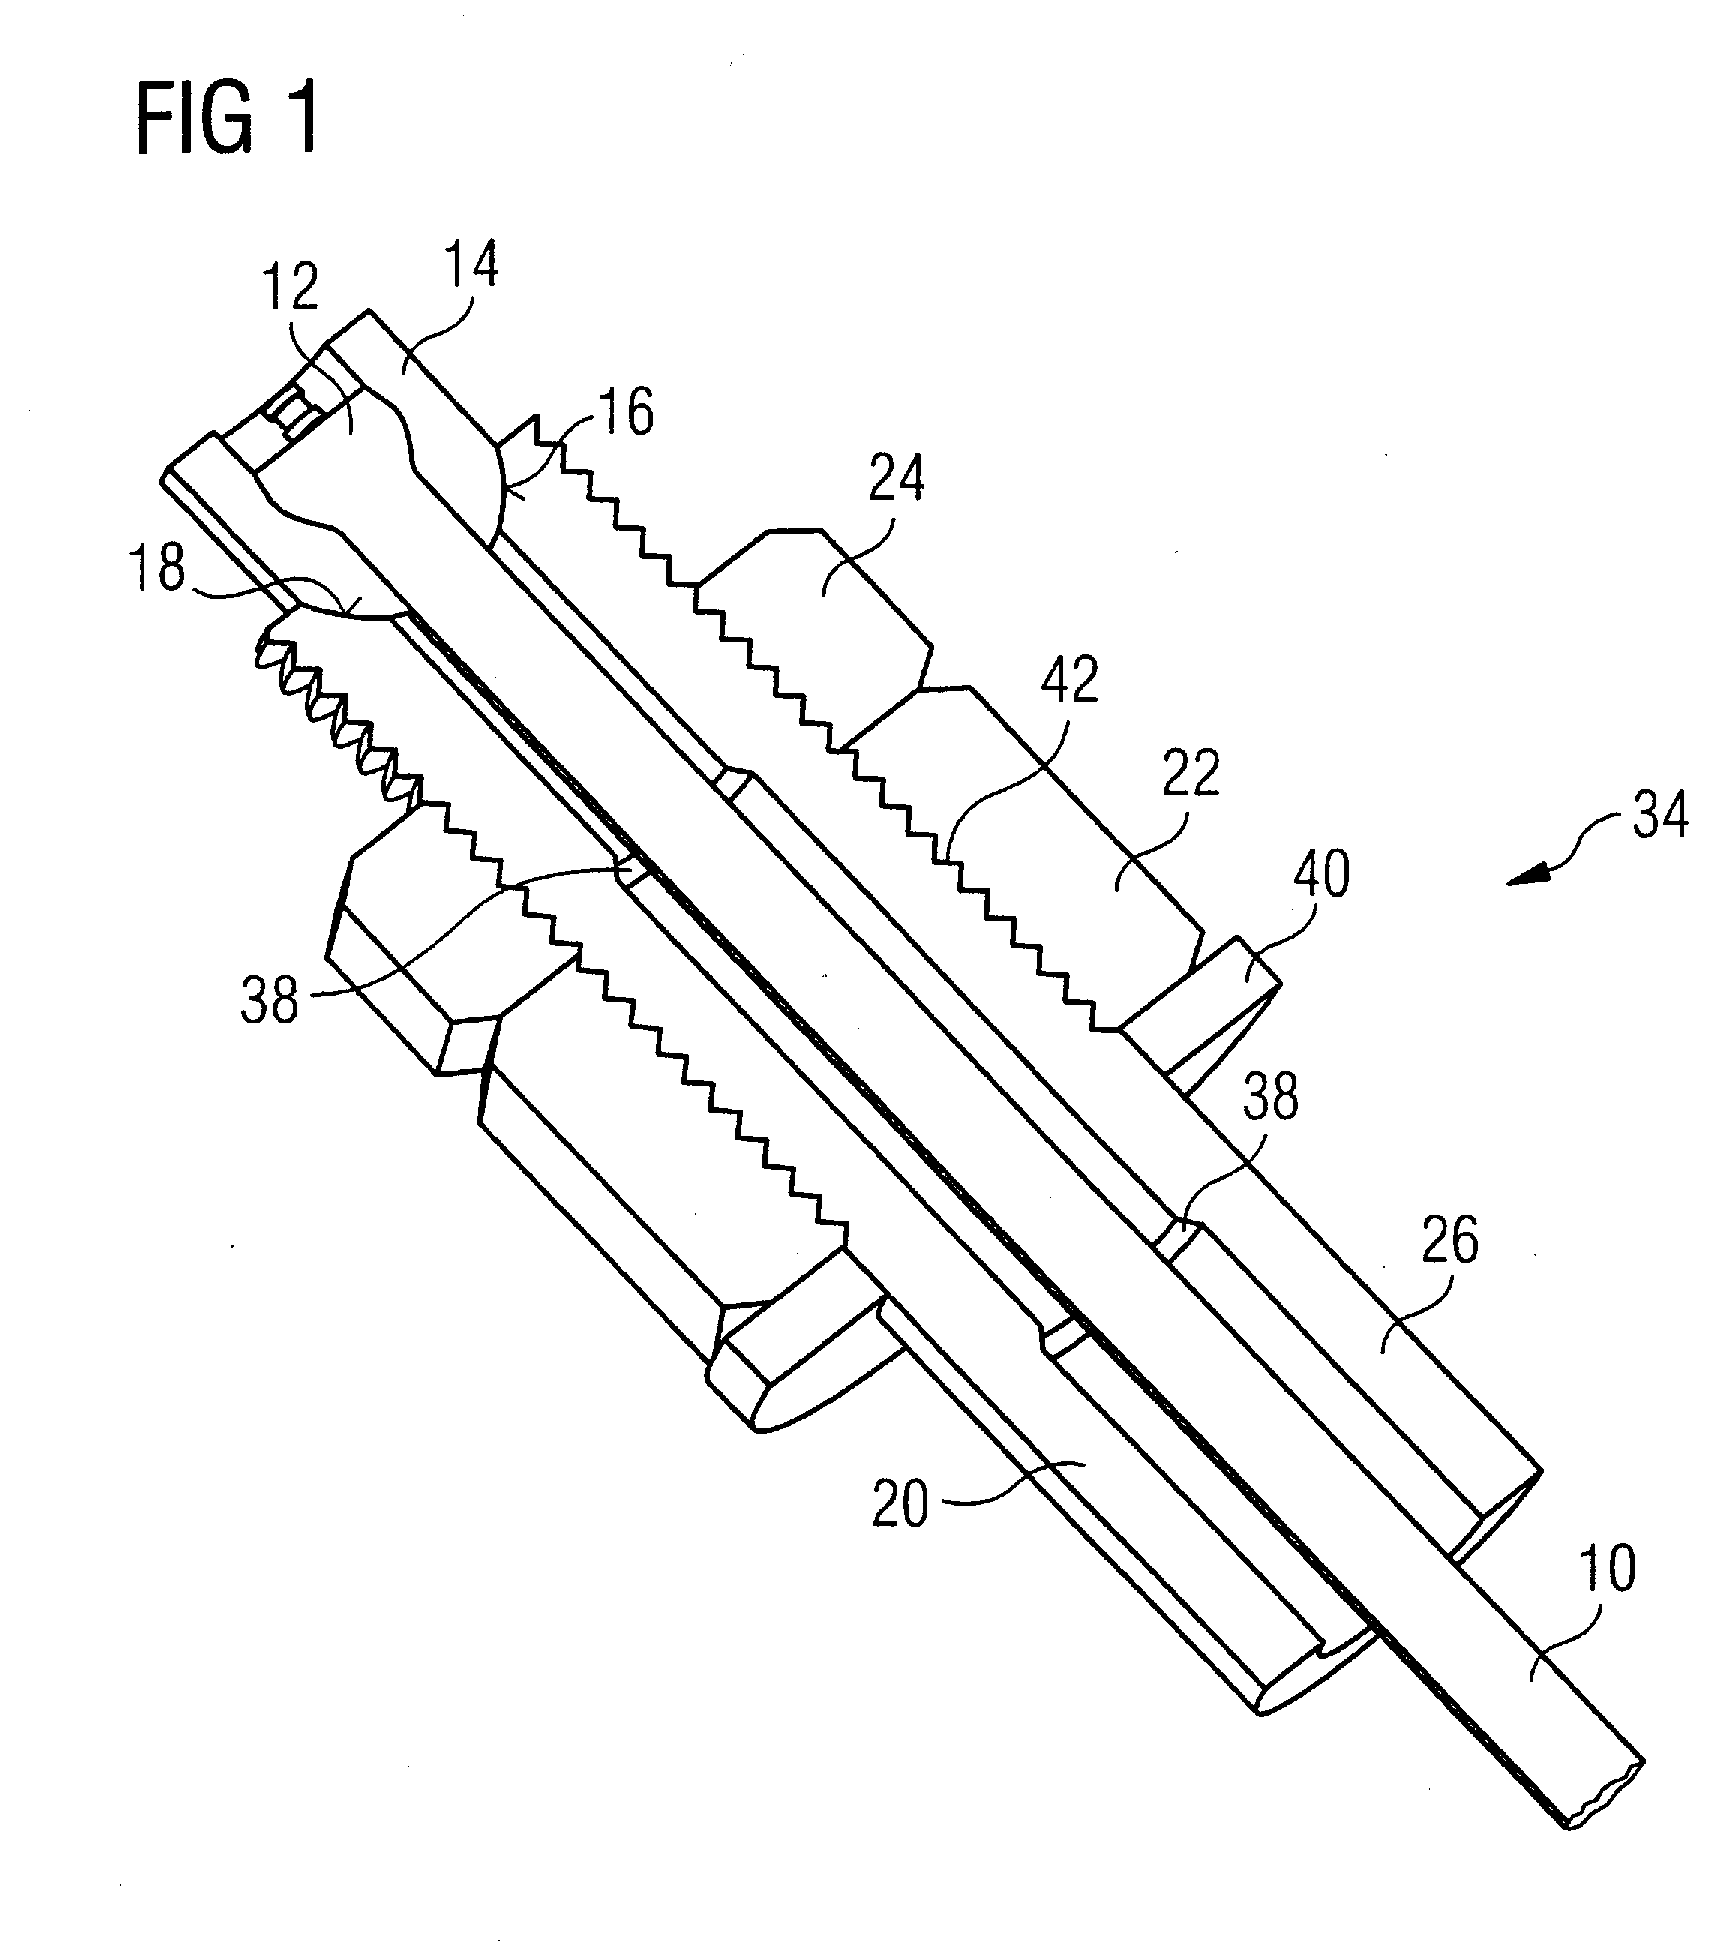 Suspension rod tensioning arrangements for supporting cryogenic equipment within a cryostat